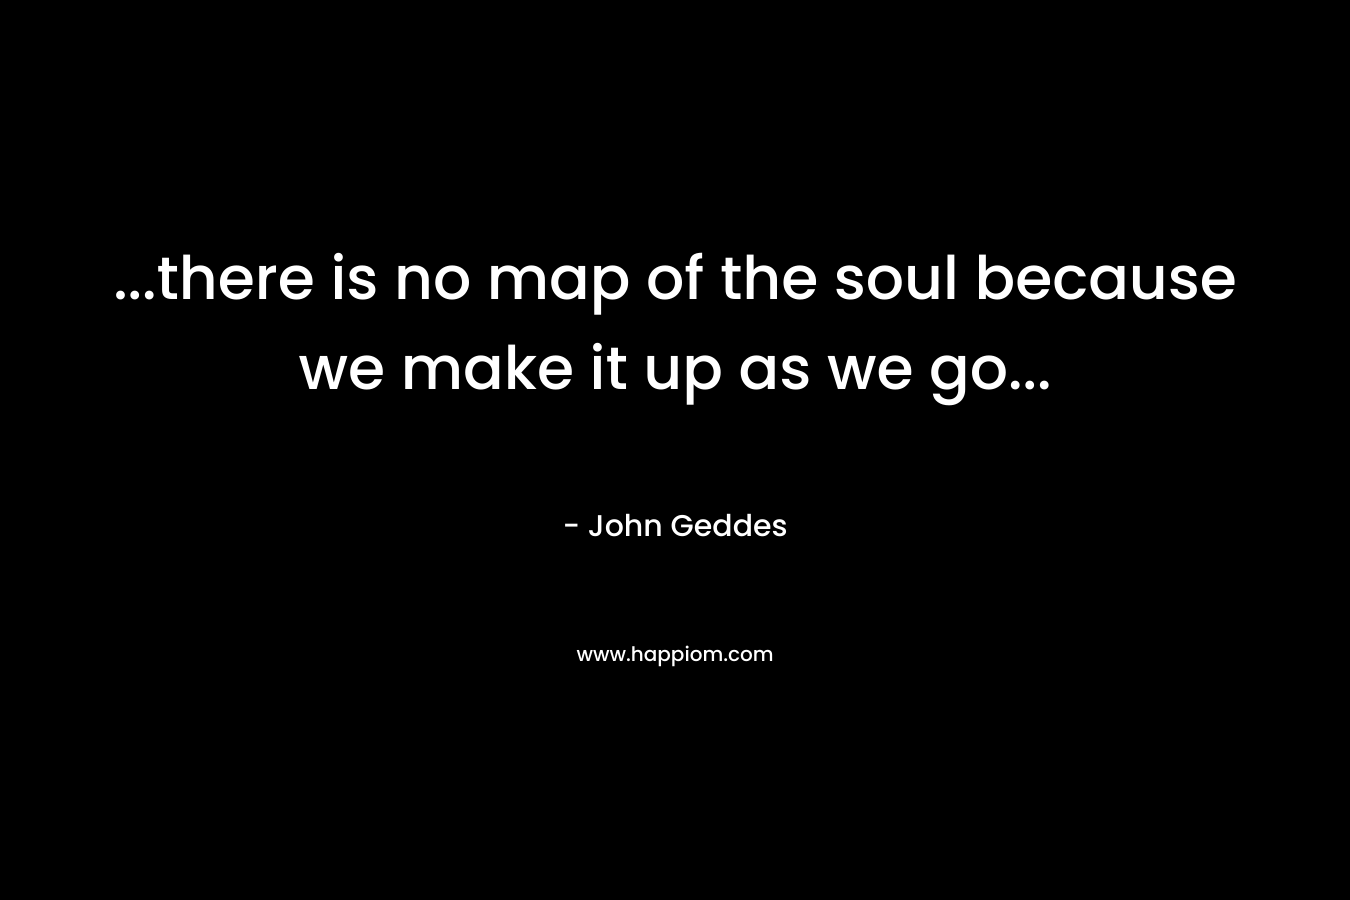 ...there is no map of the soul because we make it up as we go...